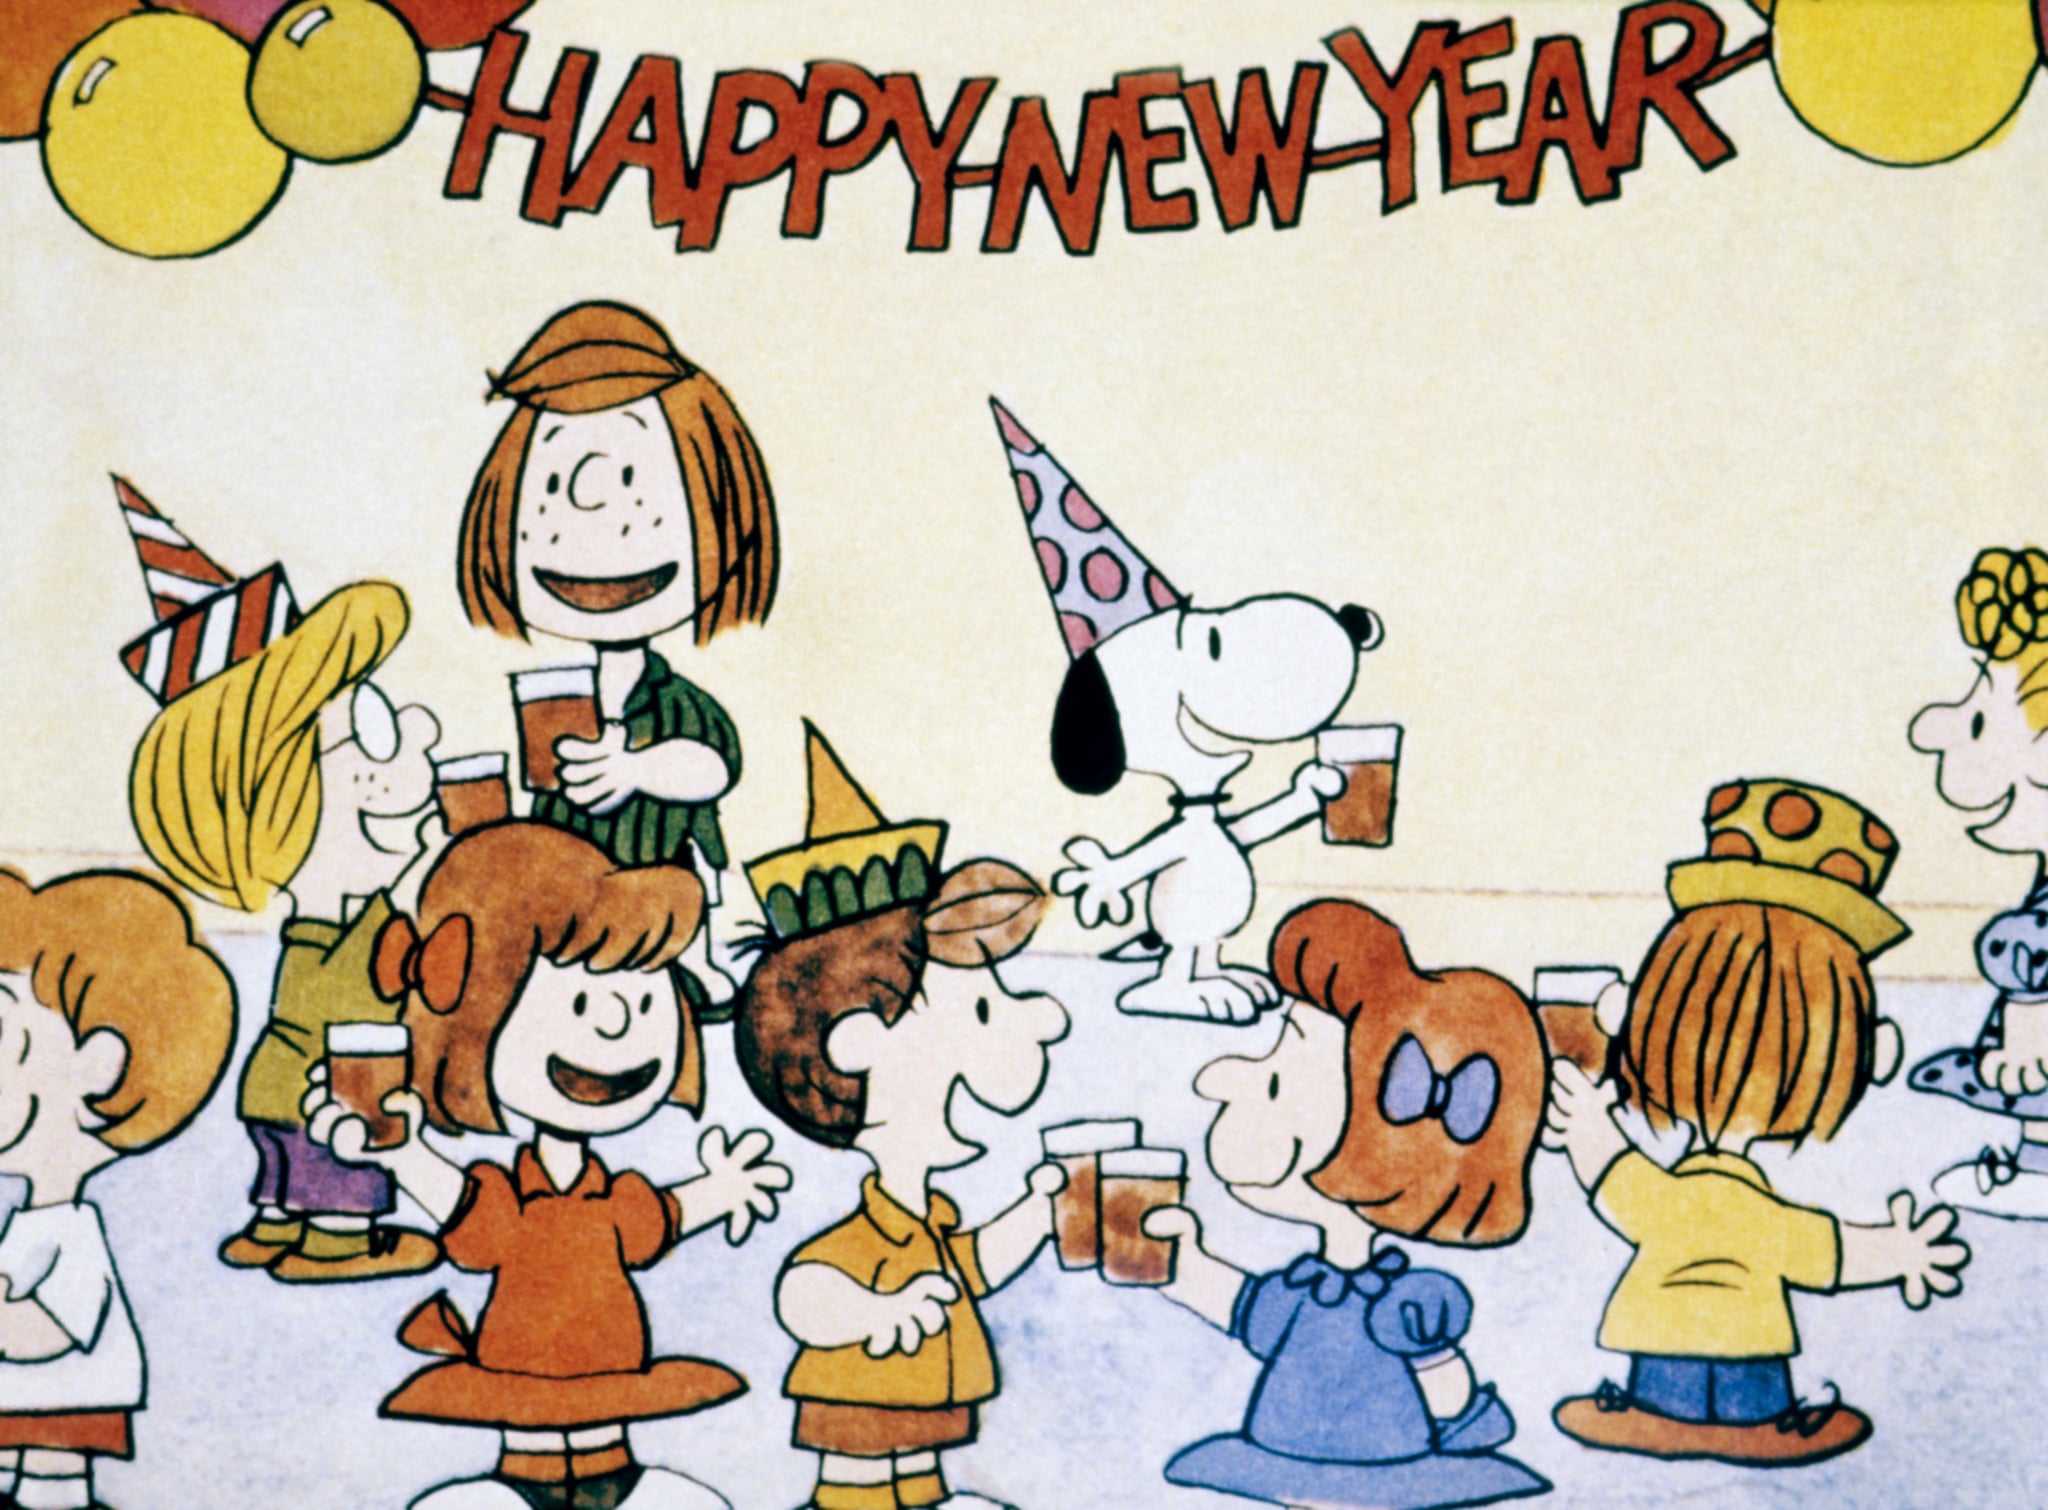 Genuine $2 Bill Details about   Peanuts HAPPY NEW YEAR Charlie Brown Officially Licensed U.S 